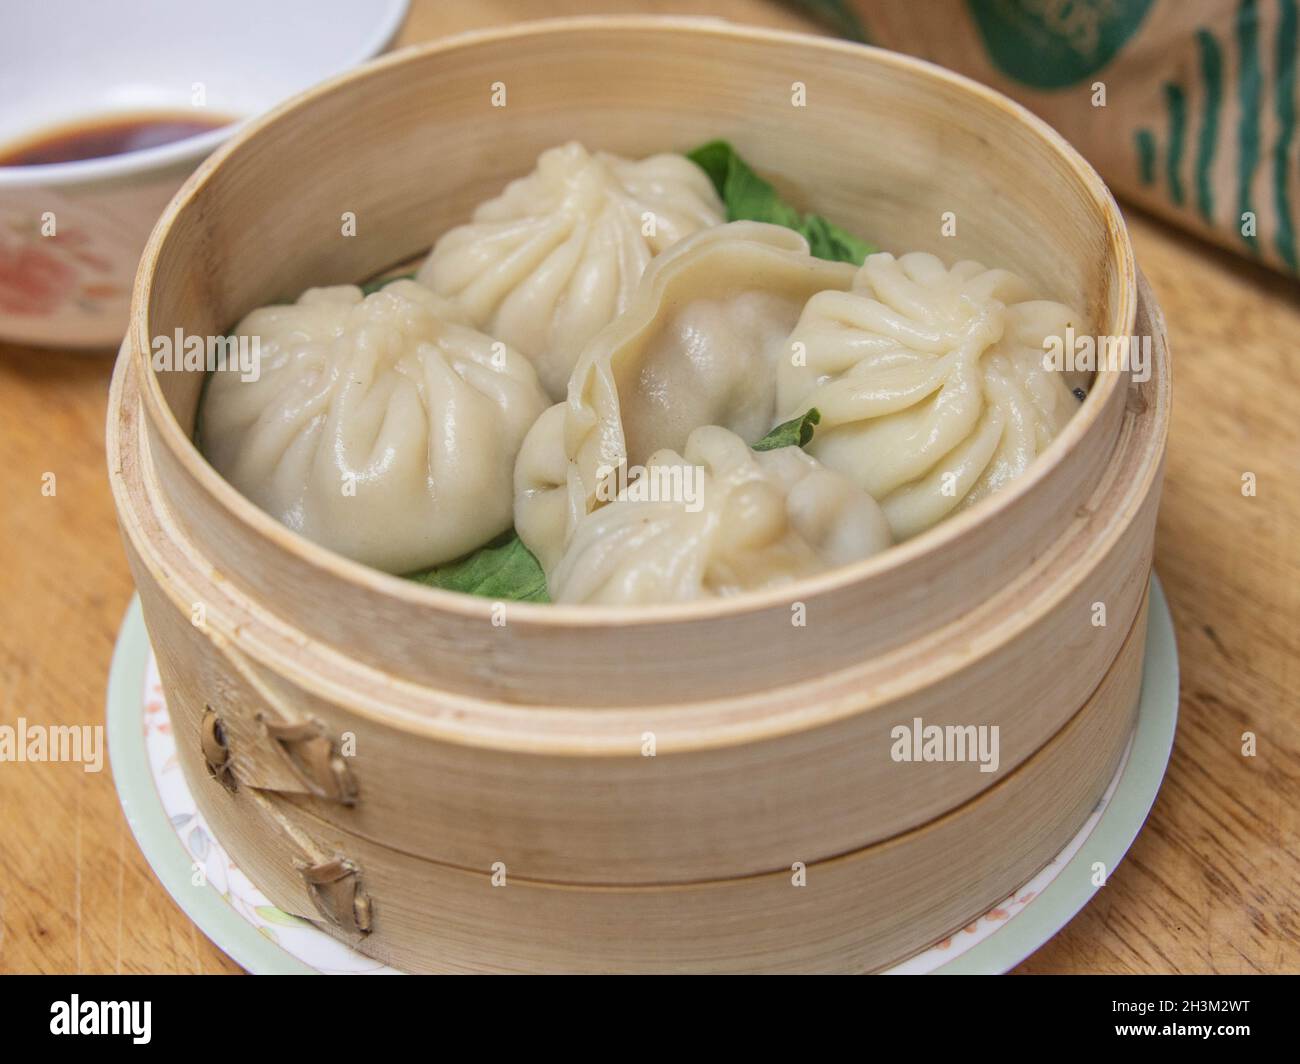 SOUP DUMPLINGS 🥟, Gallery posted by Ava_22